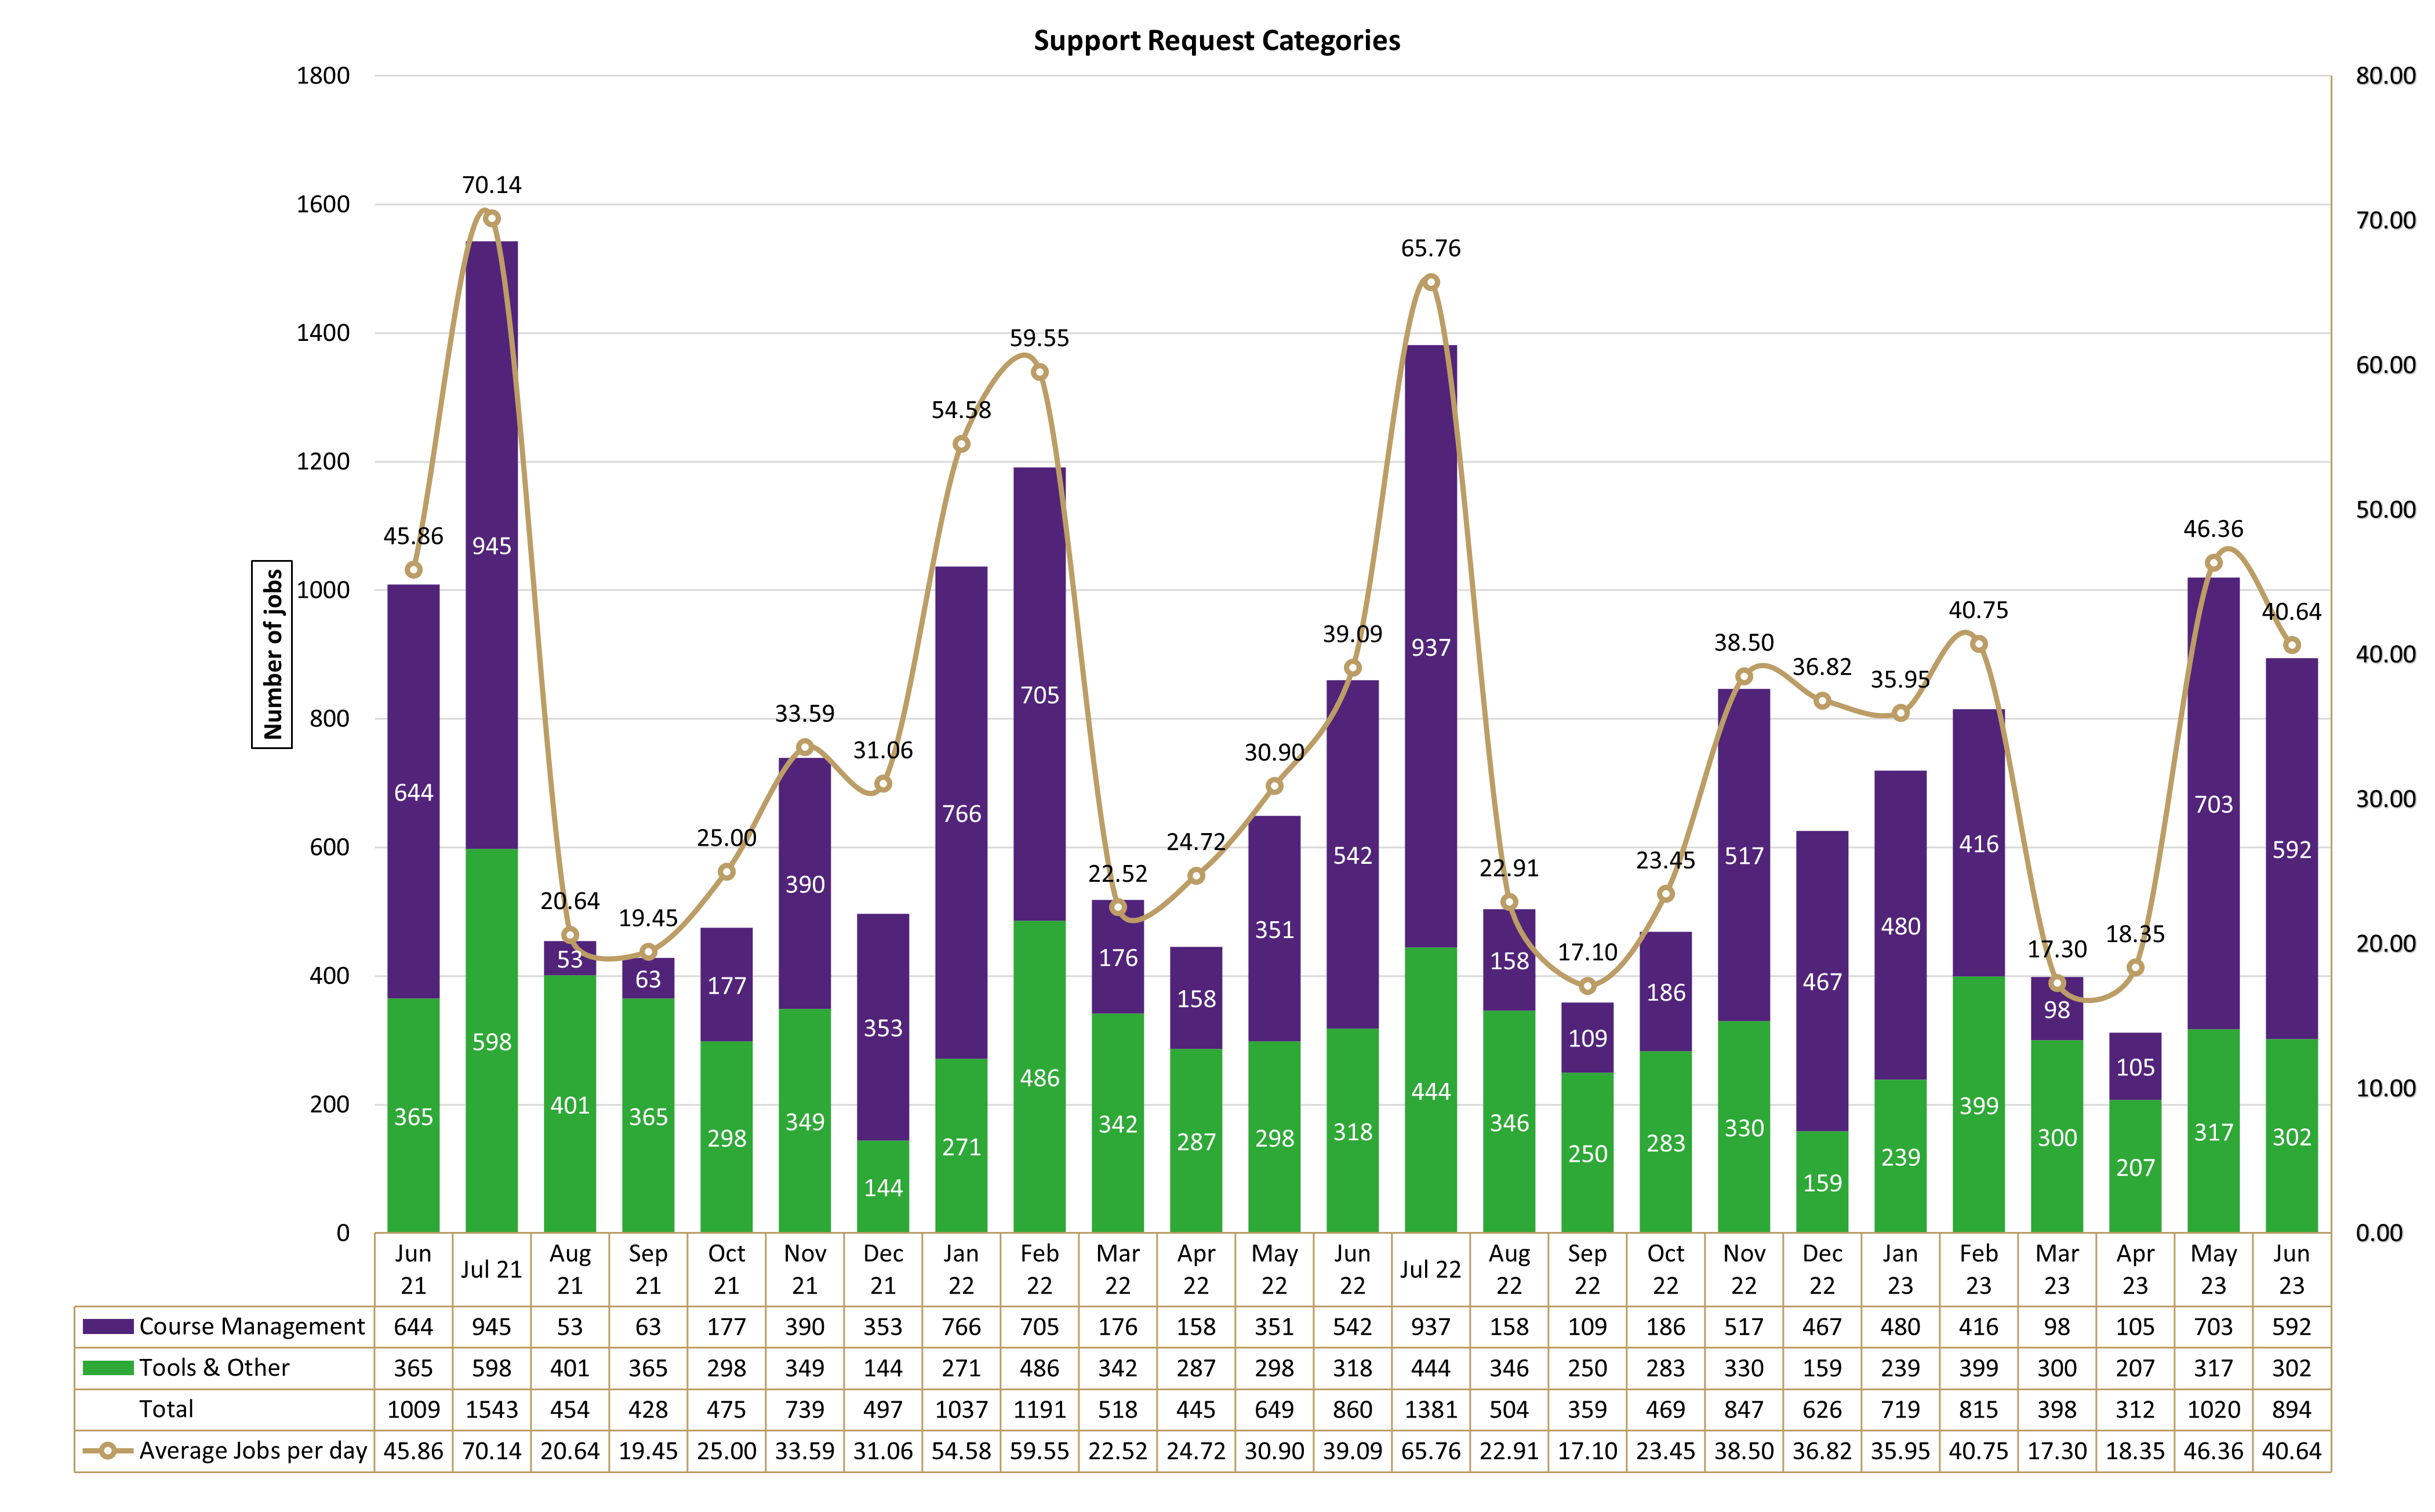 Chart of Support Request Categories from June 2021 to June 2023